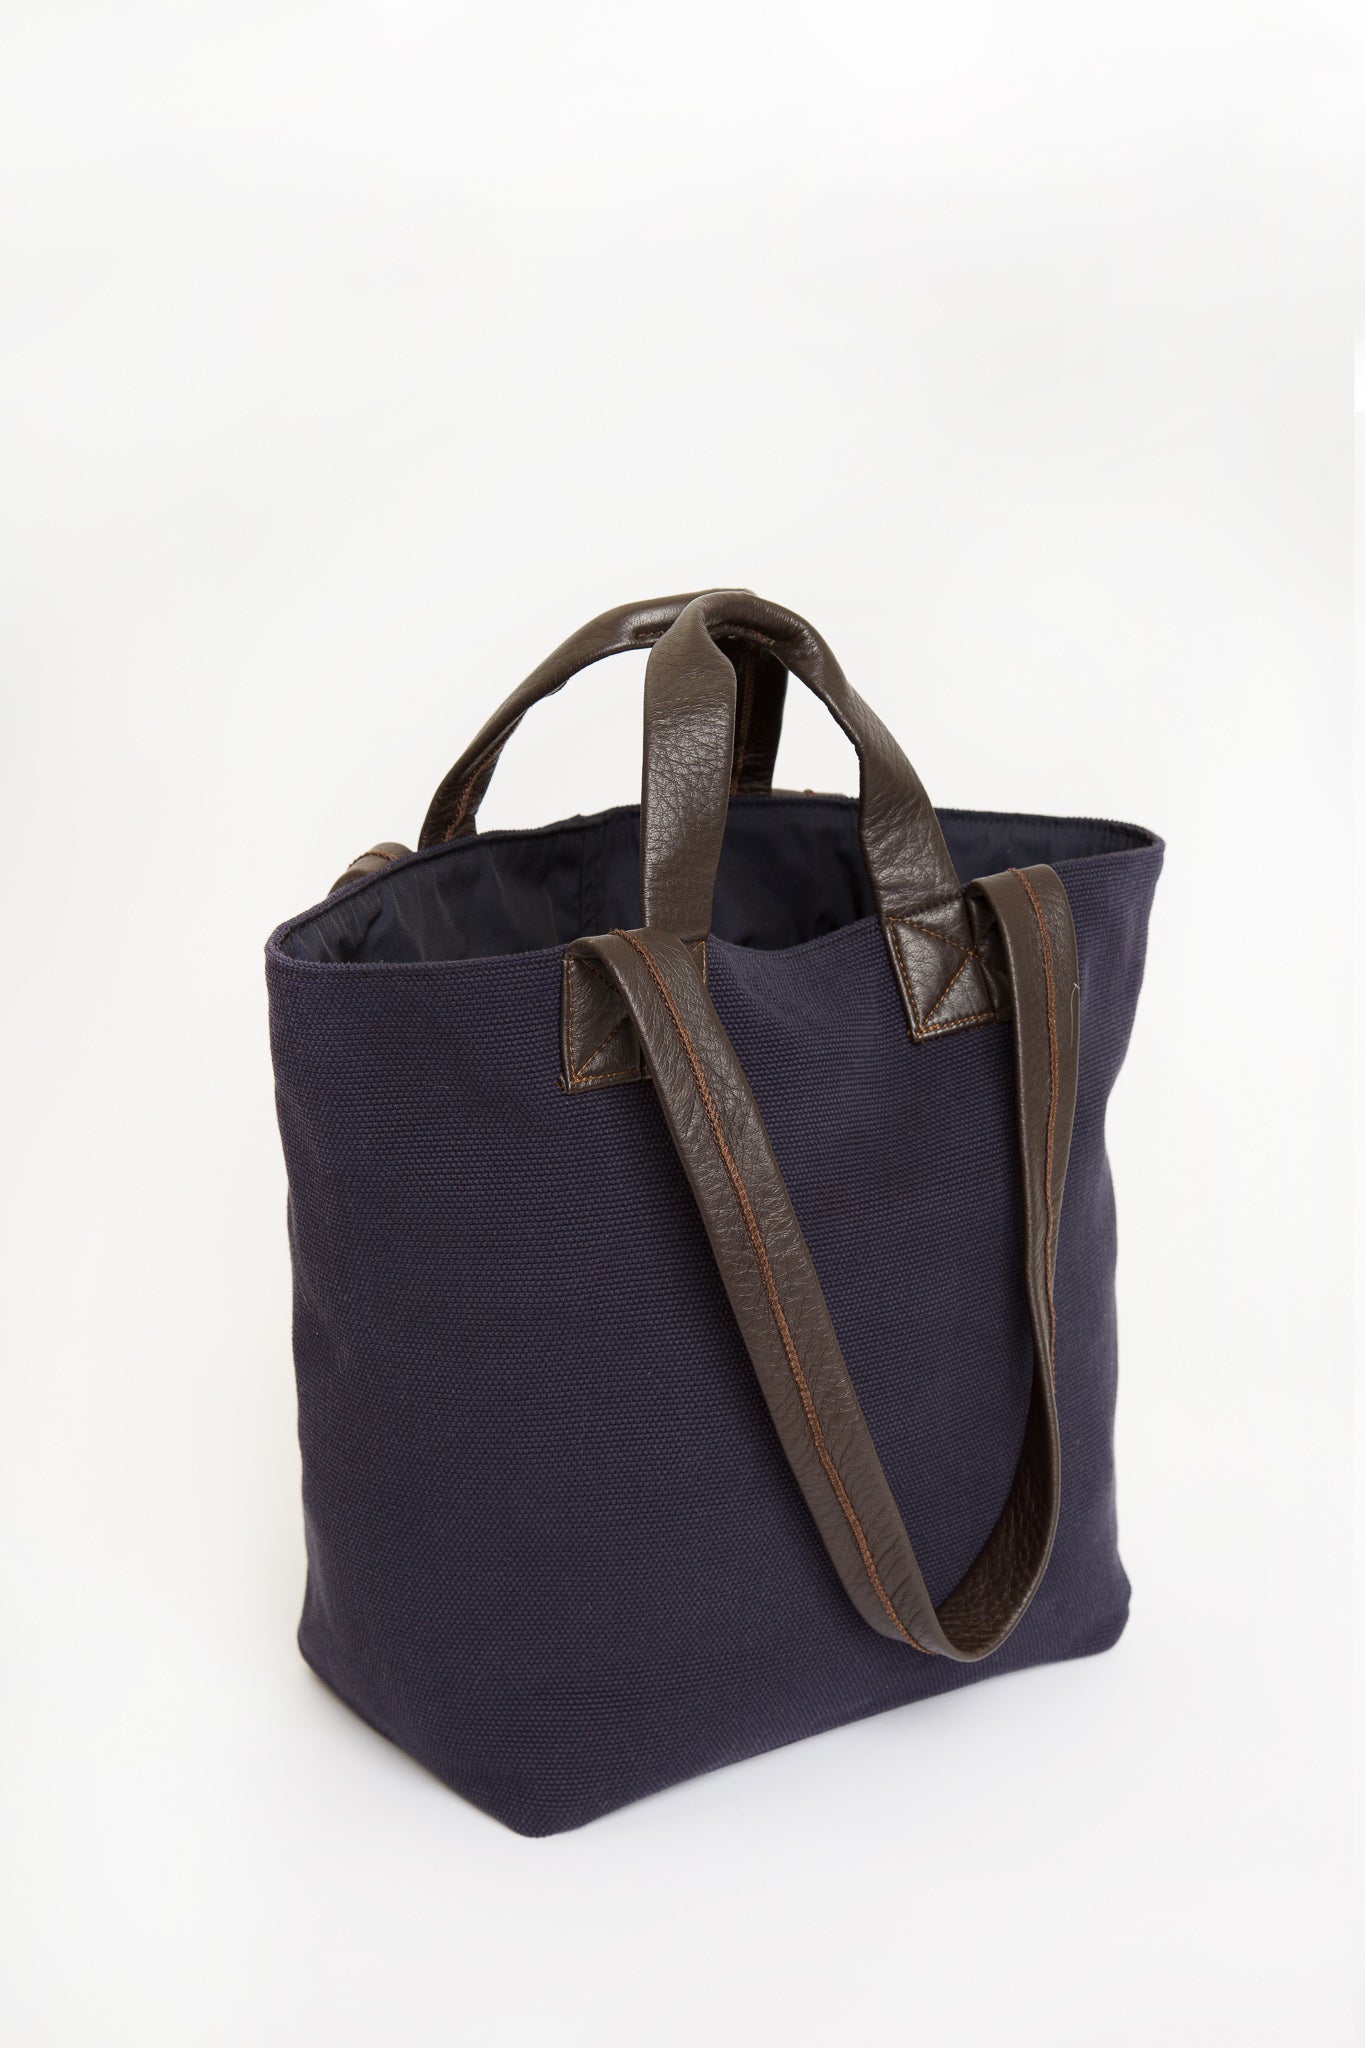 INDIGO MINI SHOPPING TOTE IN LEATHER AND CANVAS